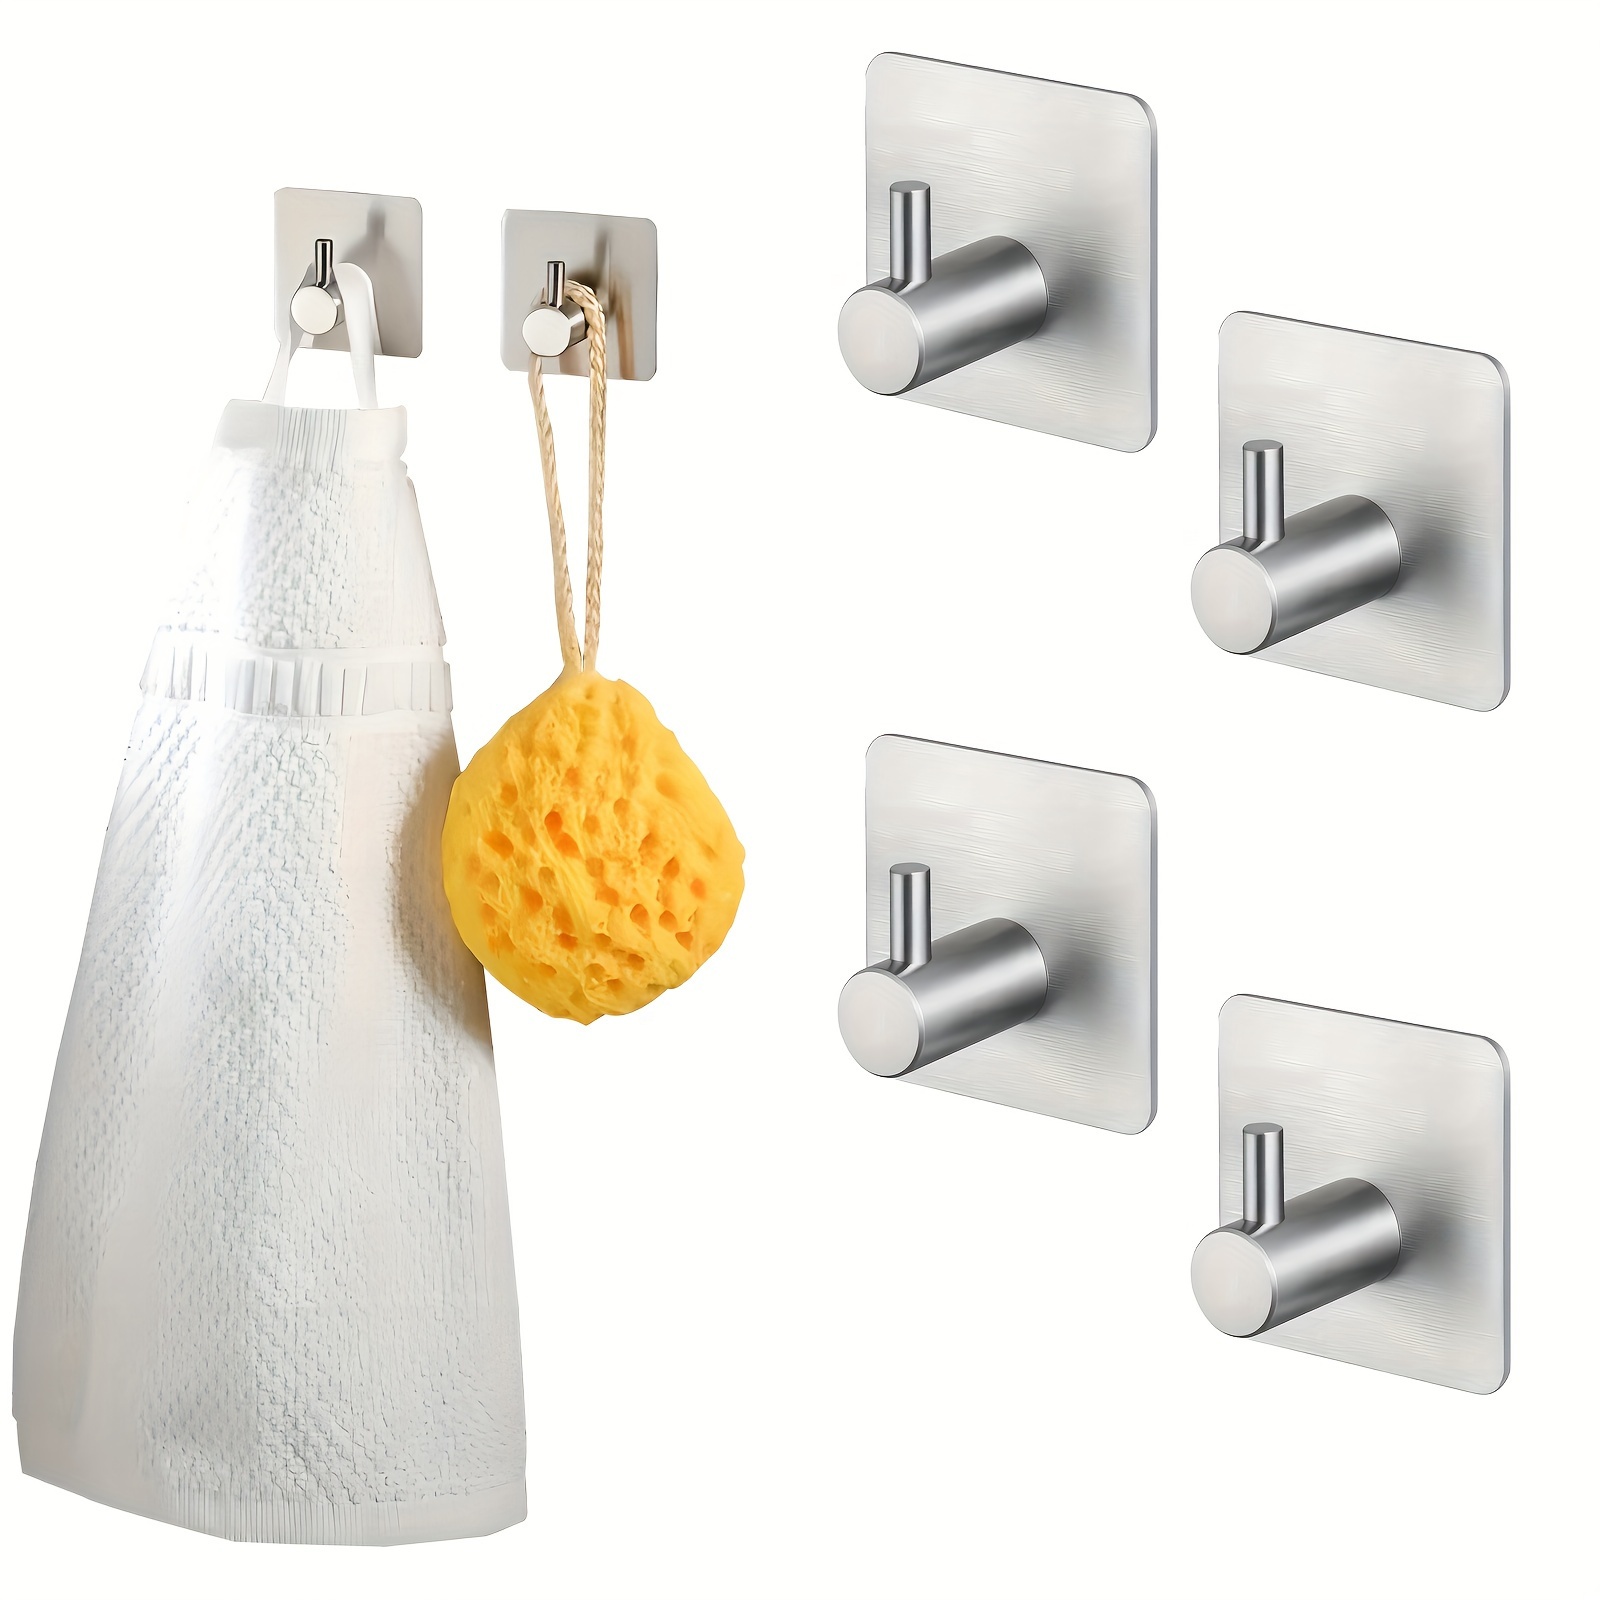 

1/2/4 Pack Stainless Steel Adhesive Hooks, Heavy-duty Wall Mount Utility Hooks For Hanging Towels, Clothes, Hats, And Robes - Easy To Install, Perfect For Bathroom, Kitchen, And Office Use